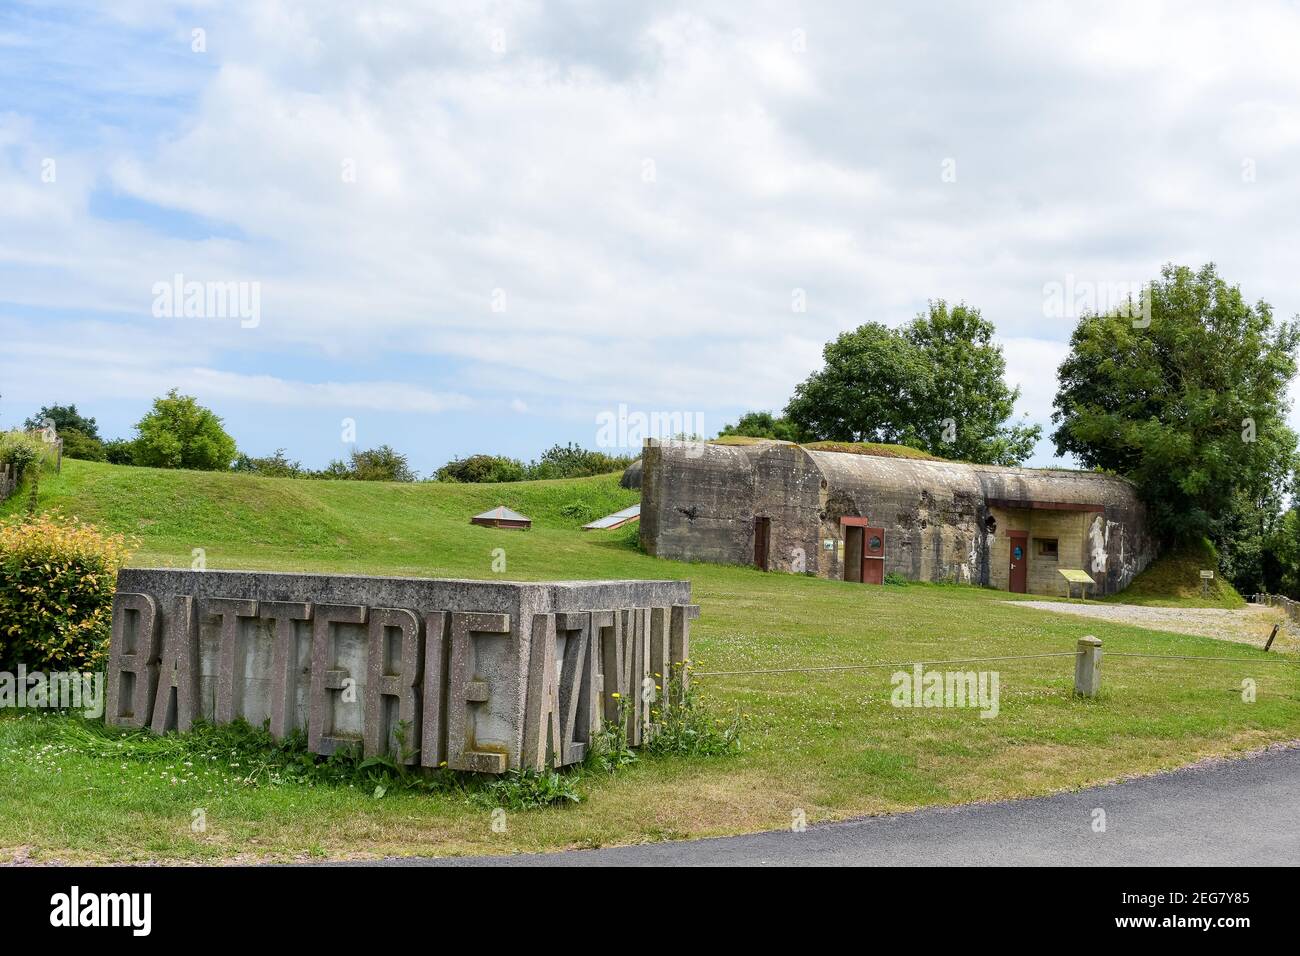 NORMANDY, FRANCE - July 4, 2017: Logo and entrance to the historic site of Batterie d'Azeville, in the battle of the Normandy landings during the Seco Stock Photo